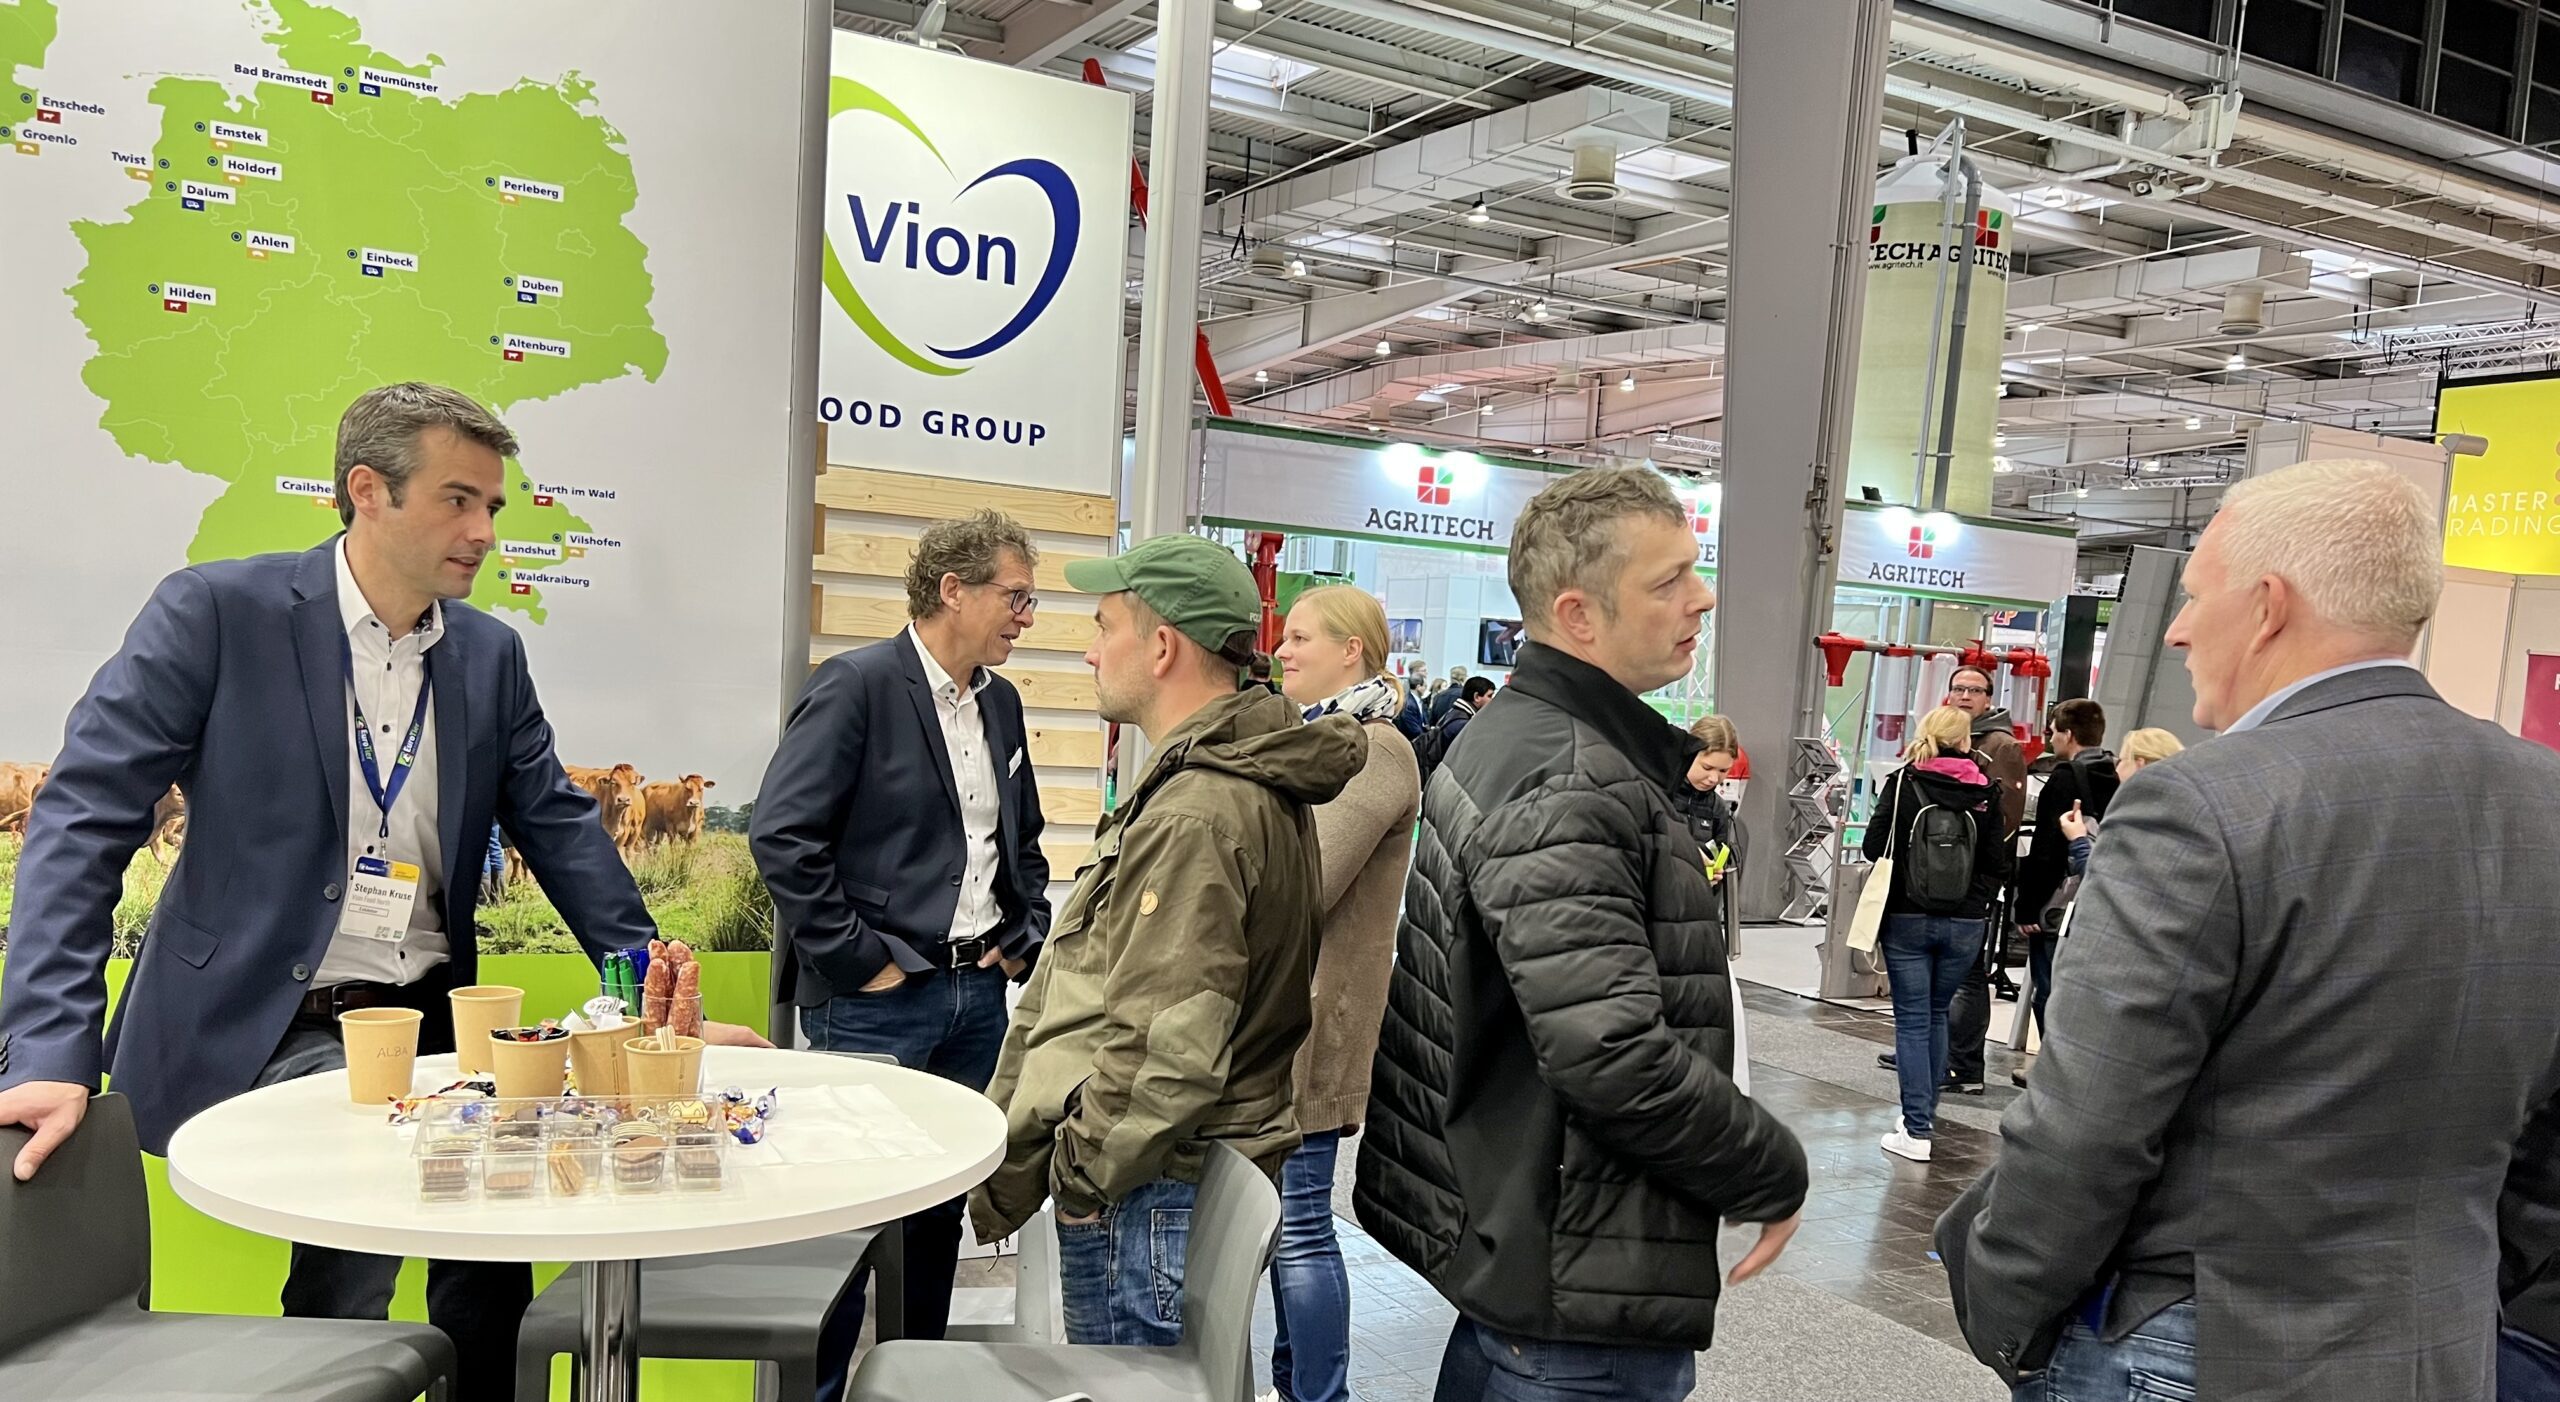 EuroTier 2022 in Hanover – Vion attracts considerable attention  